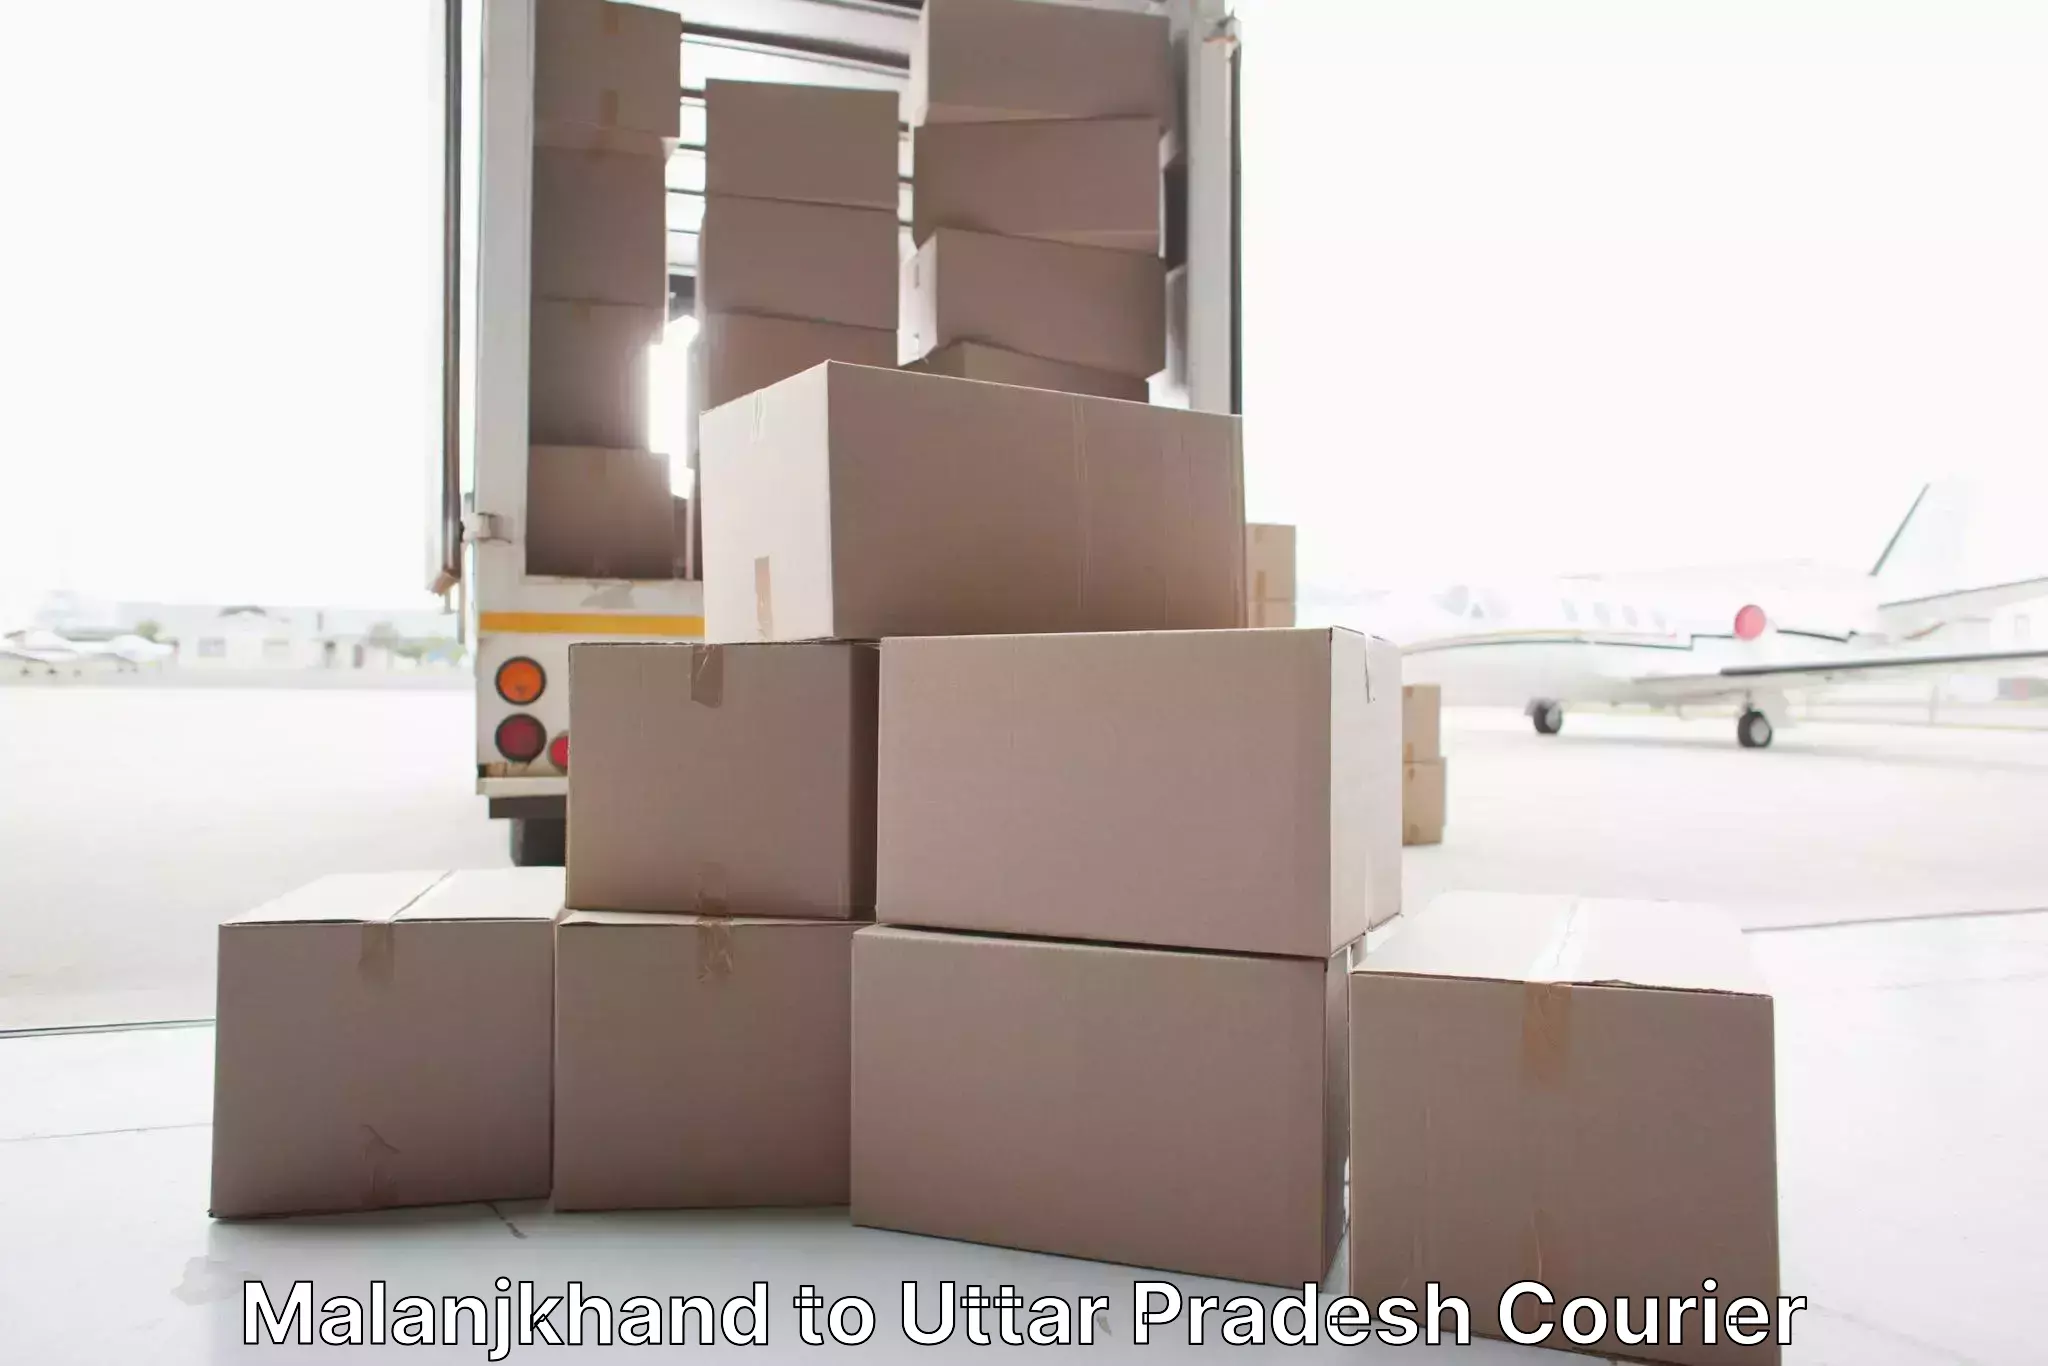 Professional moving company in Malanjkhand to Etawah